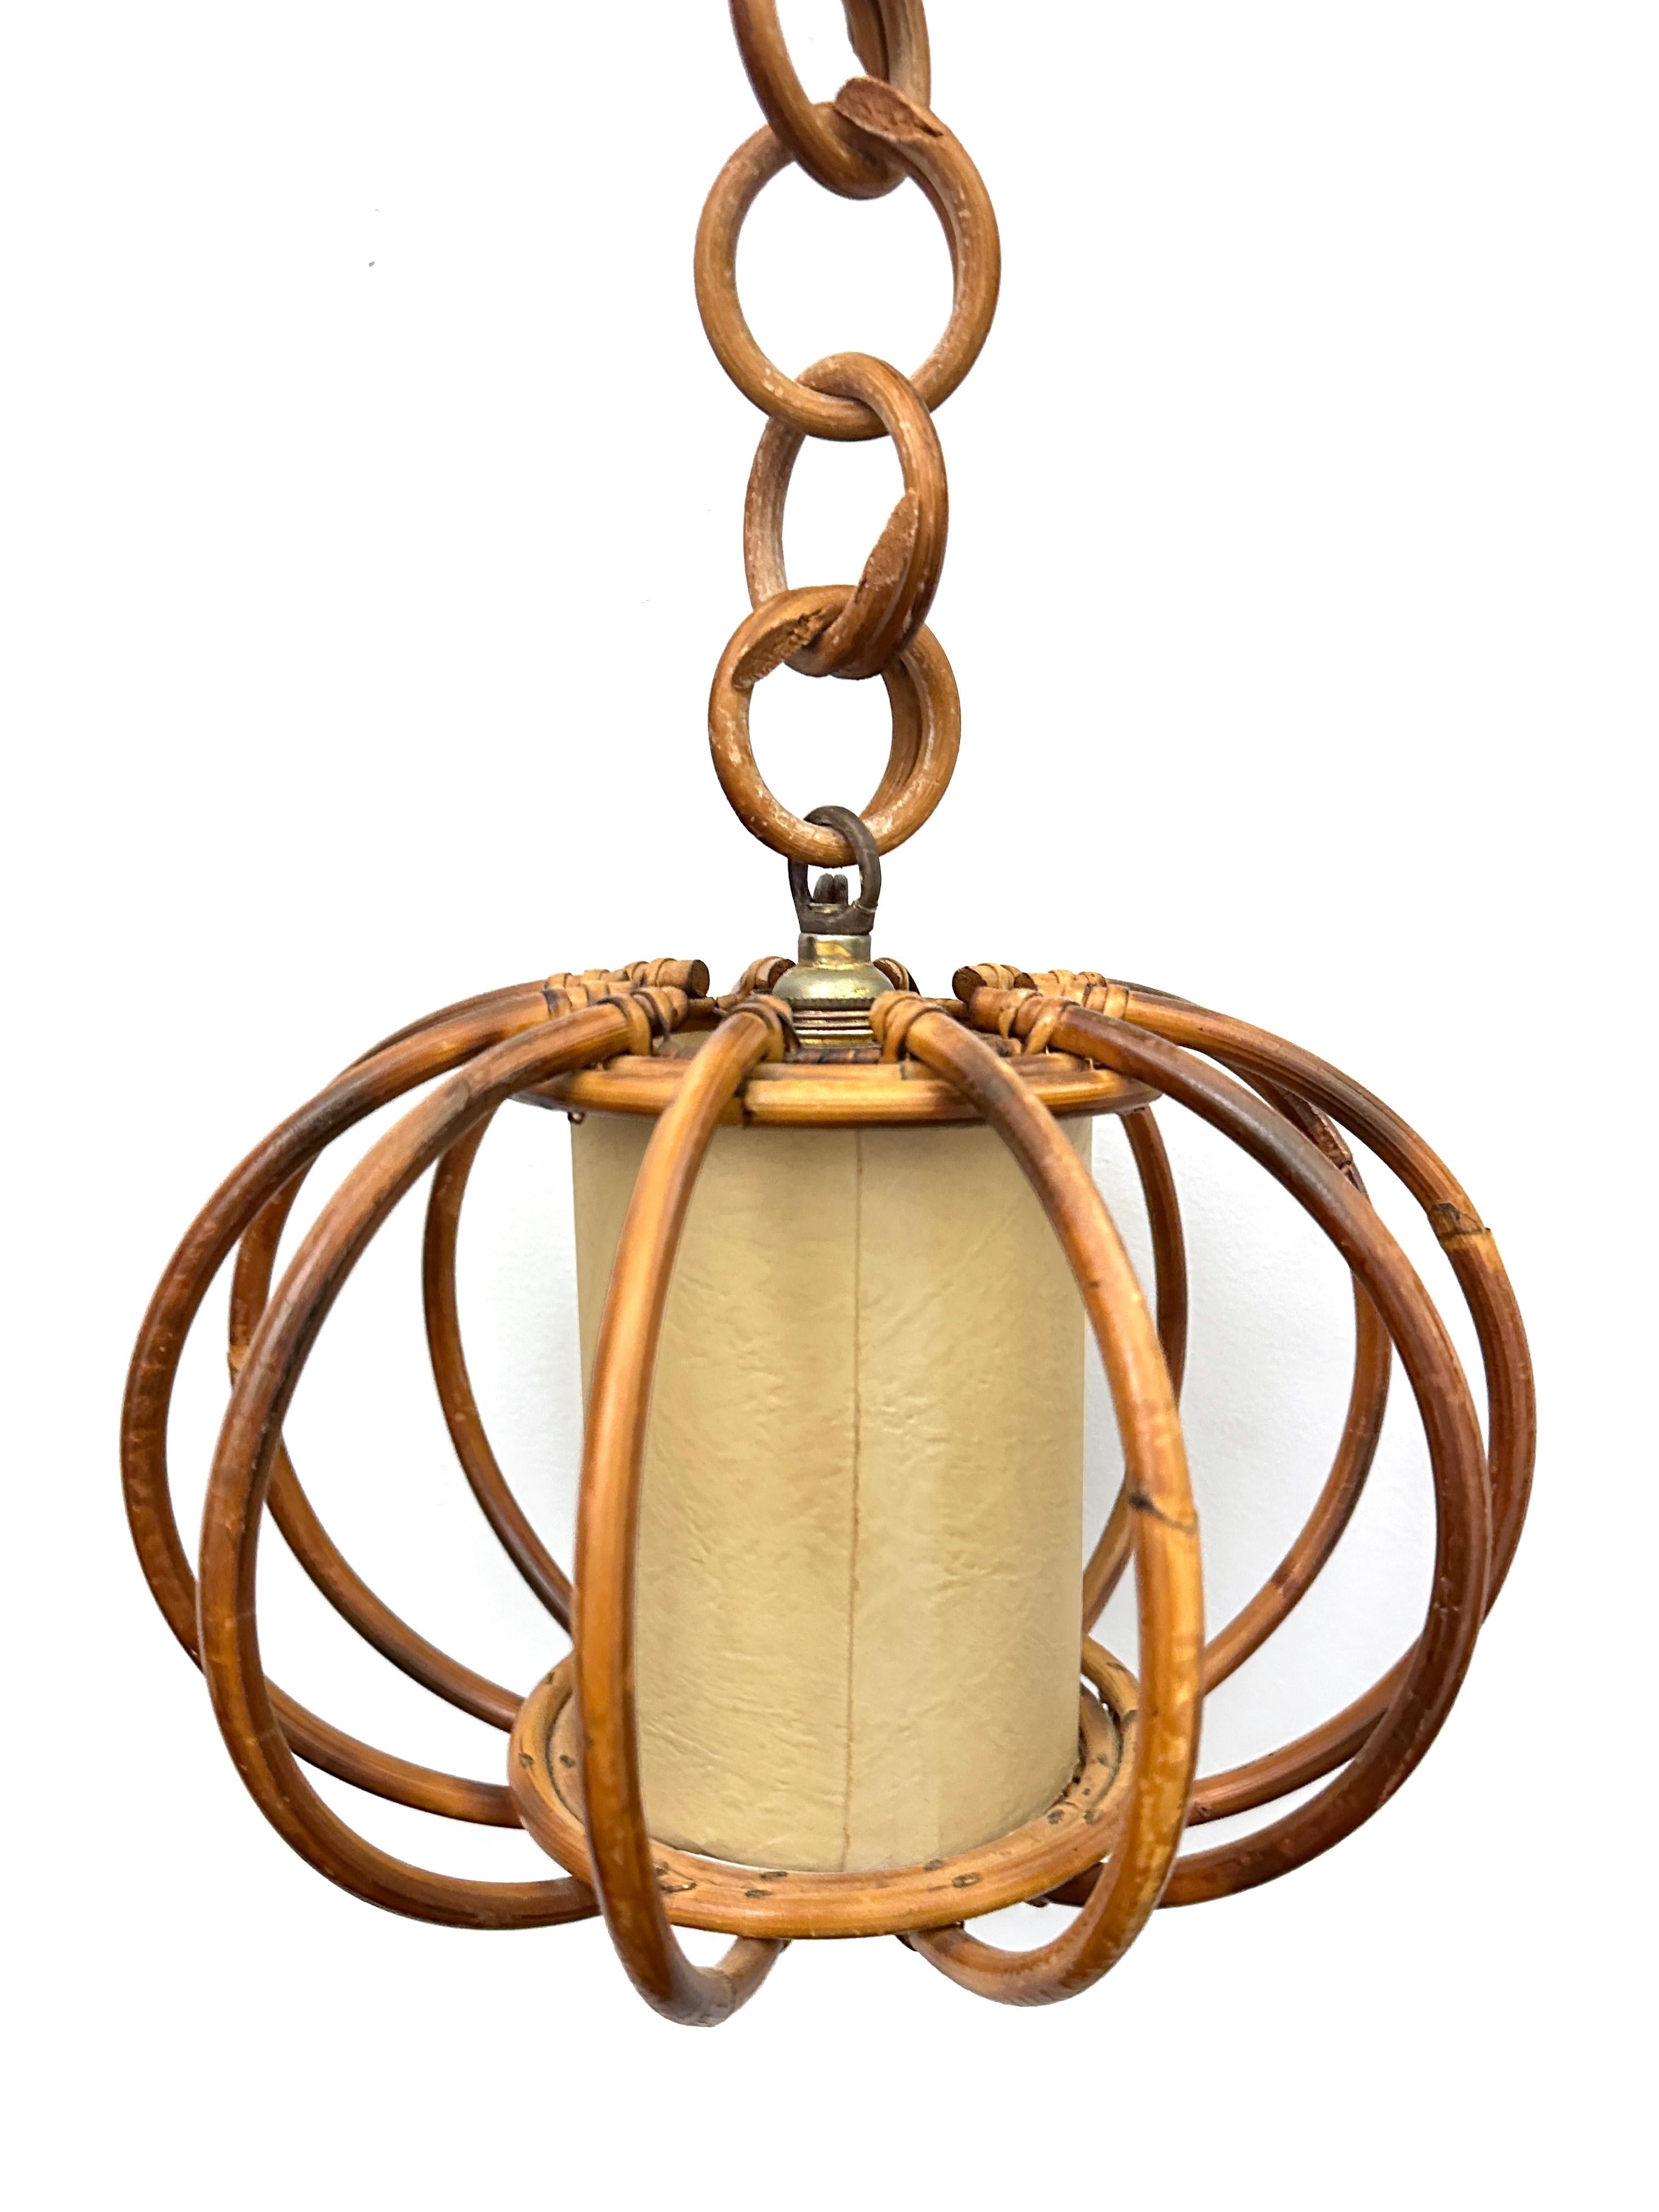 Bamboo and rattan french pendant lamp. Mid-century round piece with an interior parchment paper shade with a sort of linen texture. The interior shade is surrounded by a separate, round, rattan encasement. Beautiful hand made piece with wood vendind